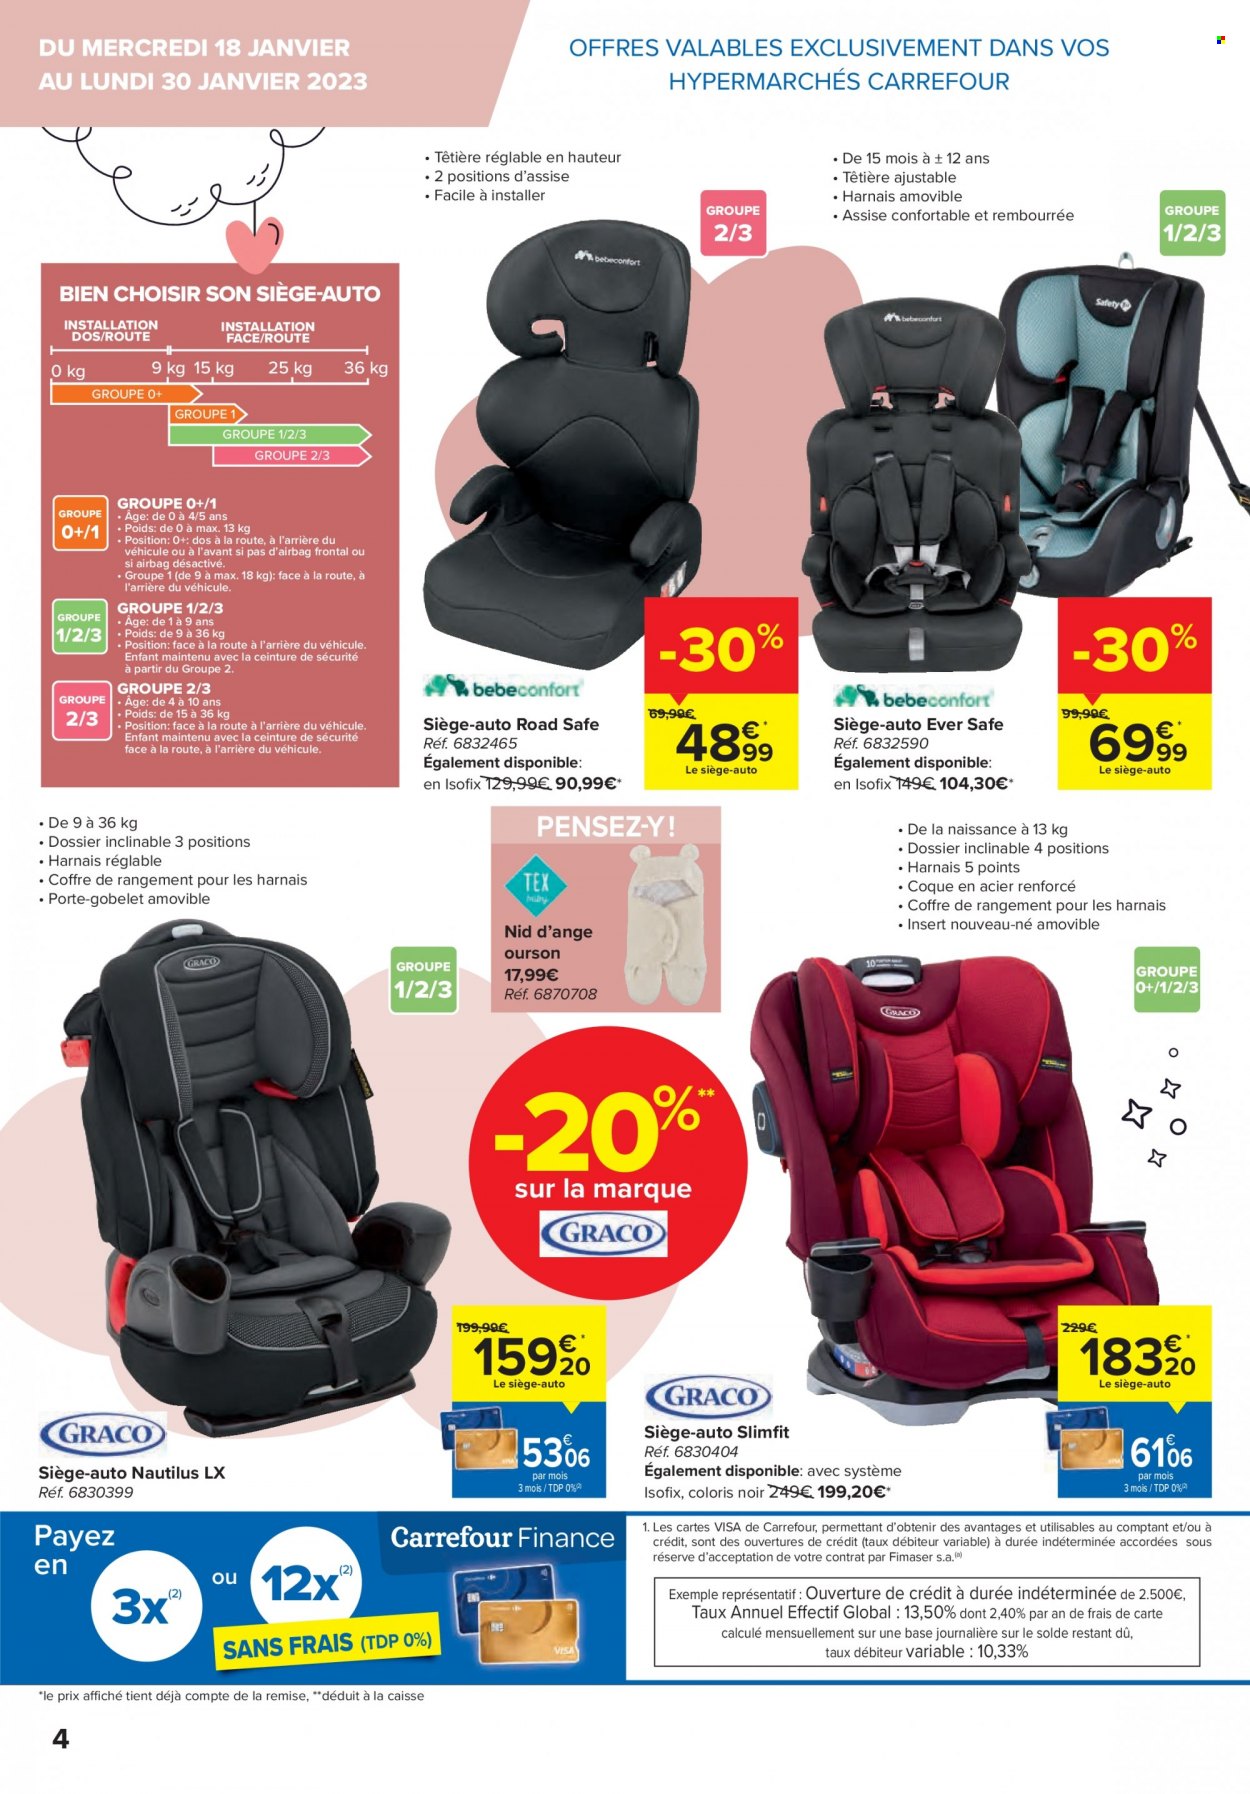 Catalogue Carrefour hypermarkt - 18.1.2023 - 30.1.2023. Page 4.